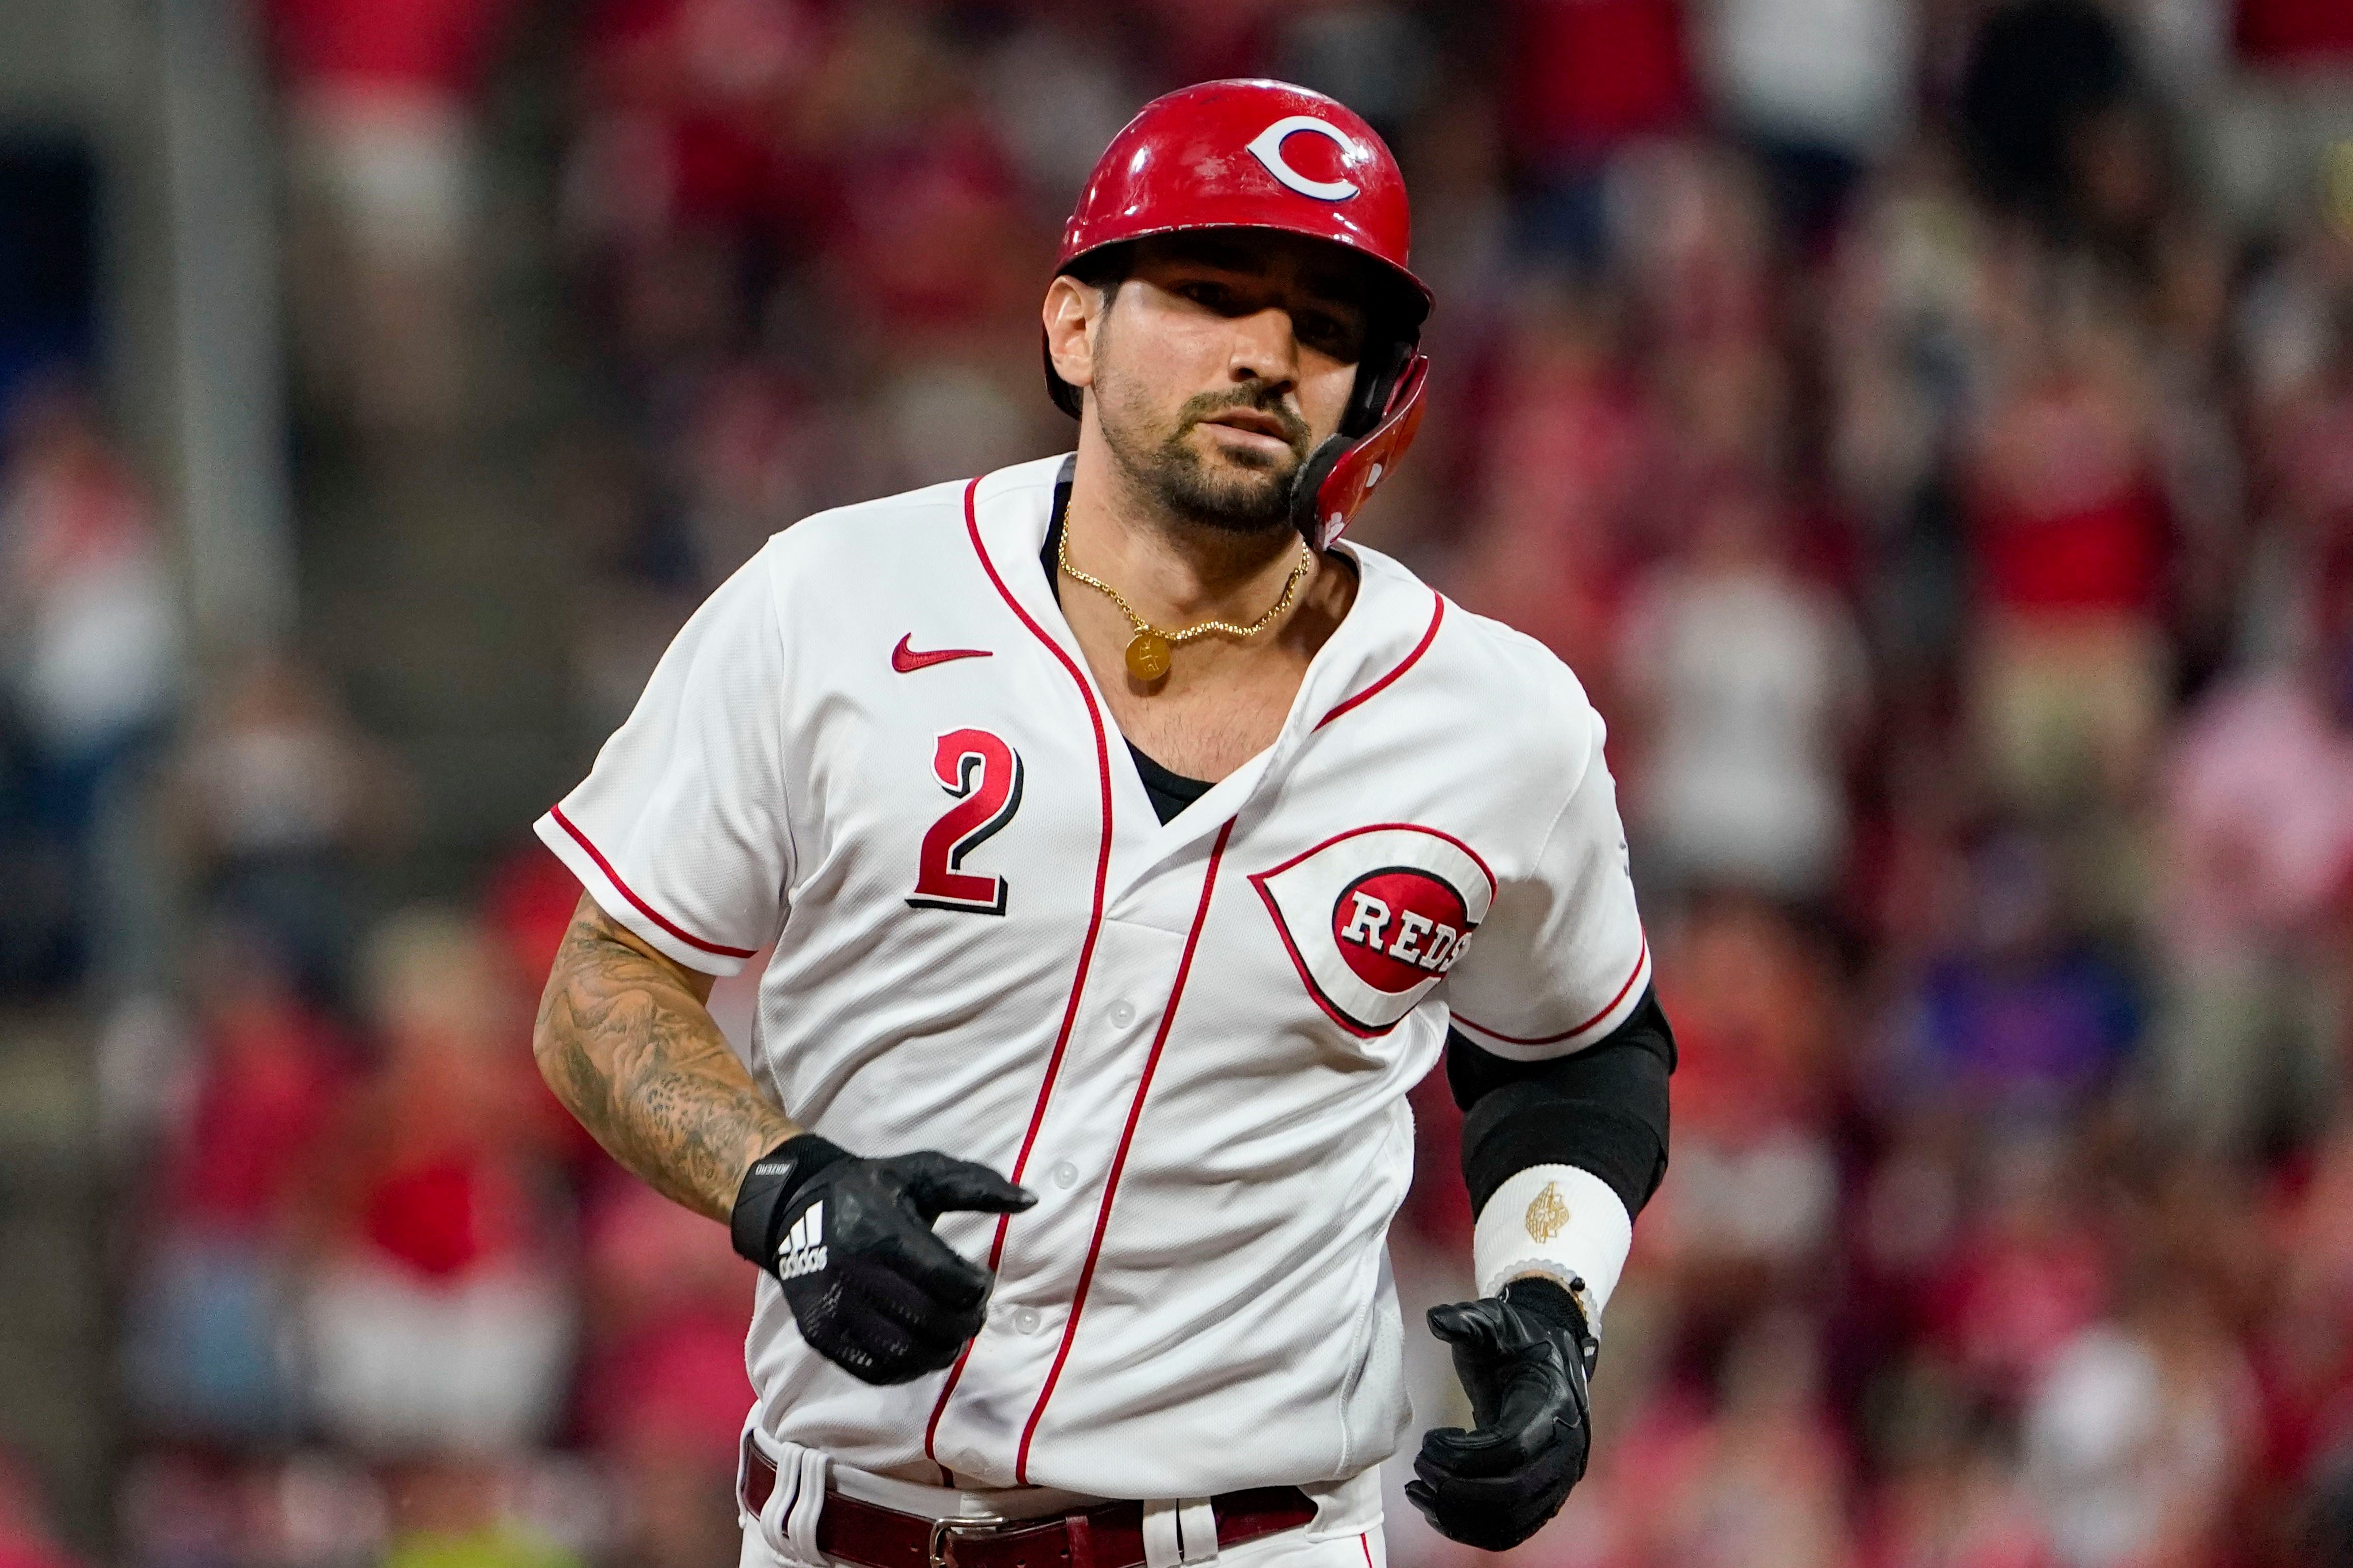 Report: Nick Castellanos signs 4-year deal with Reds